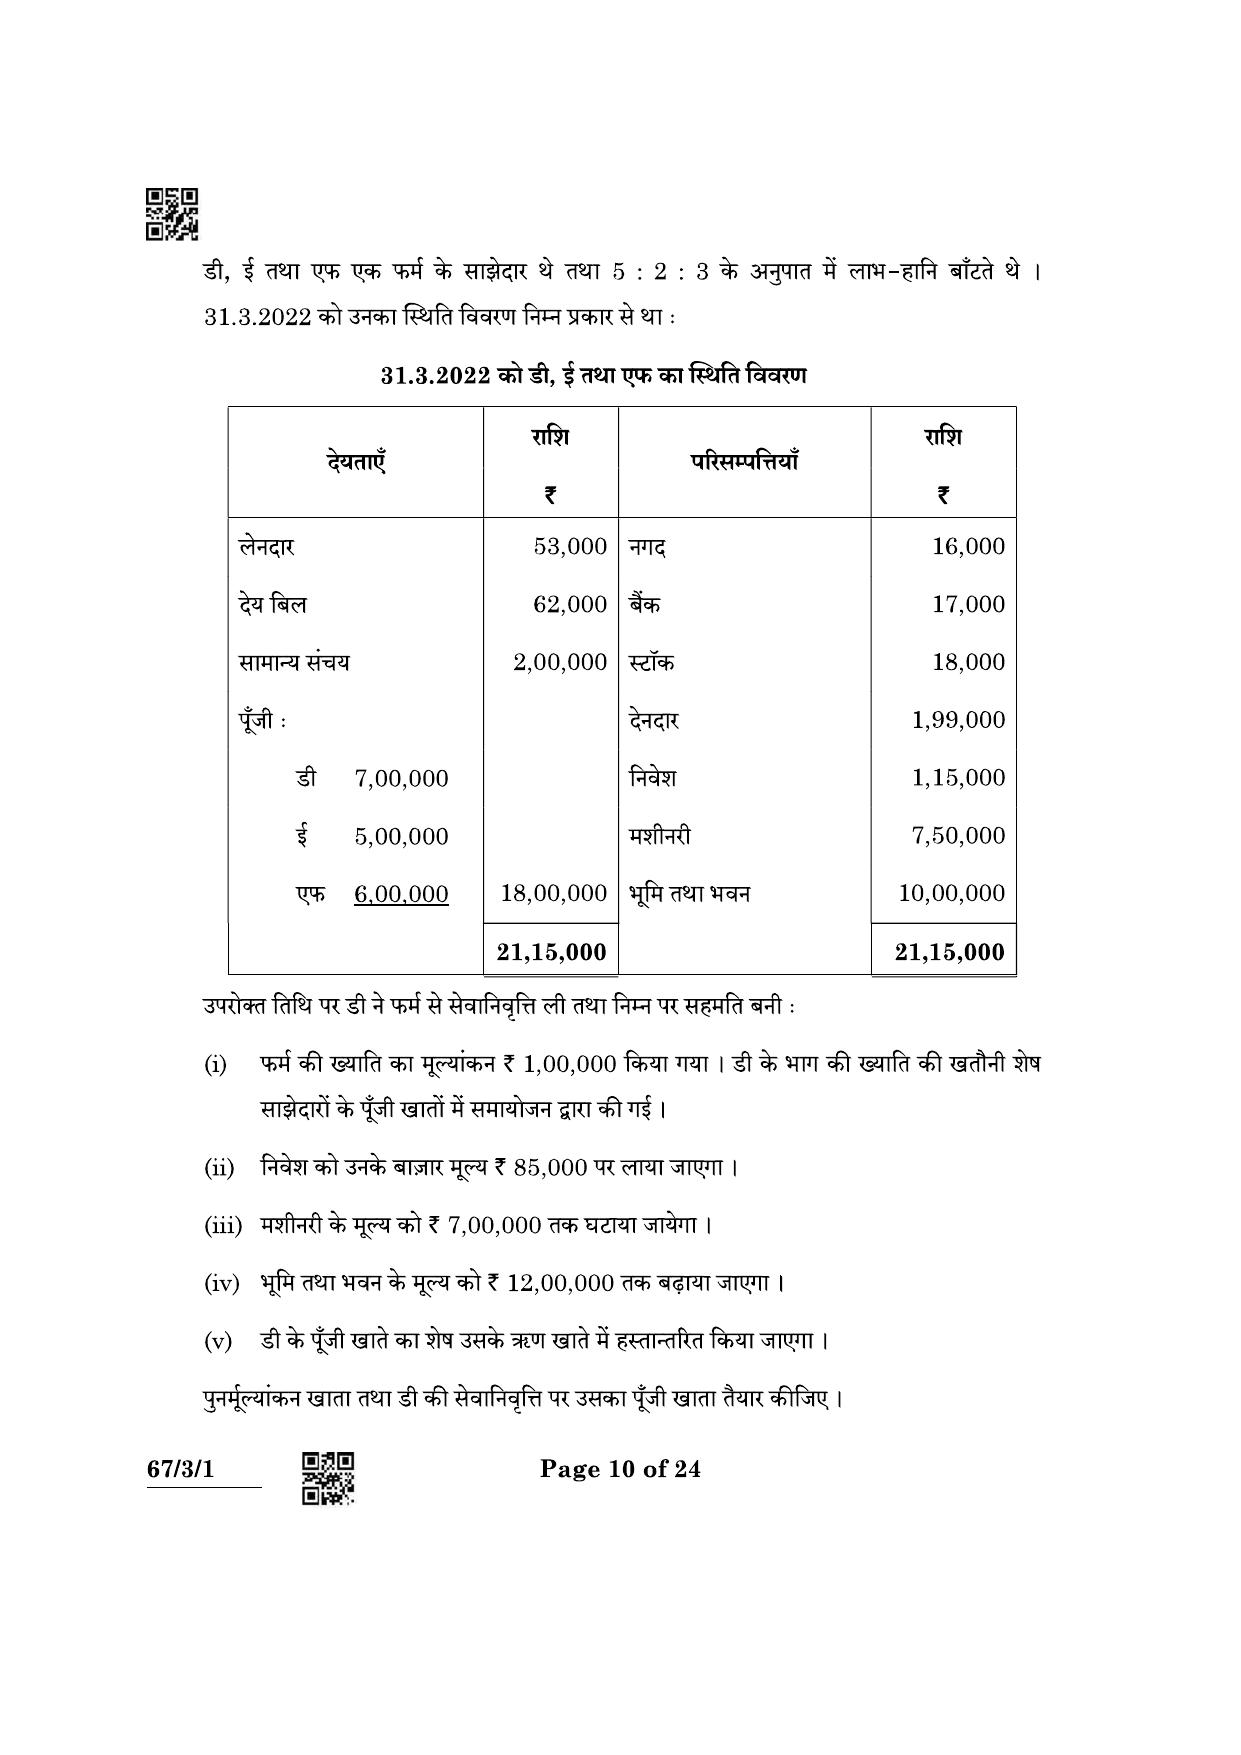 CBSE Class 12 67-3-1 Accountancy 2022 Question Paper - Page 10